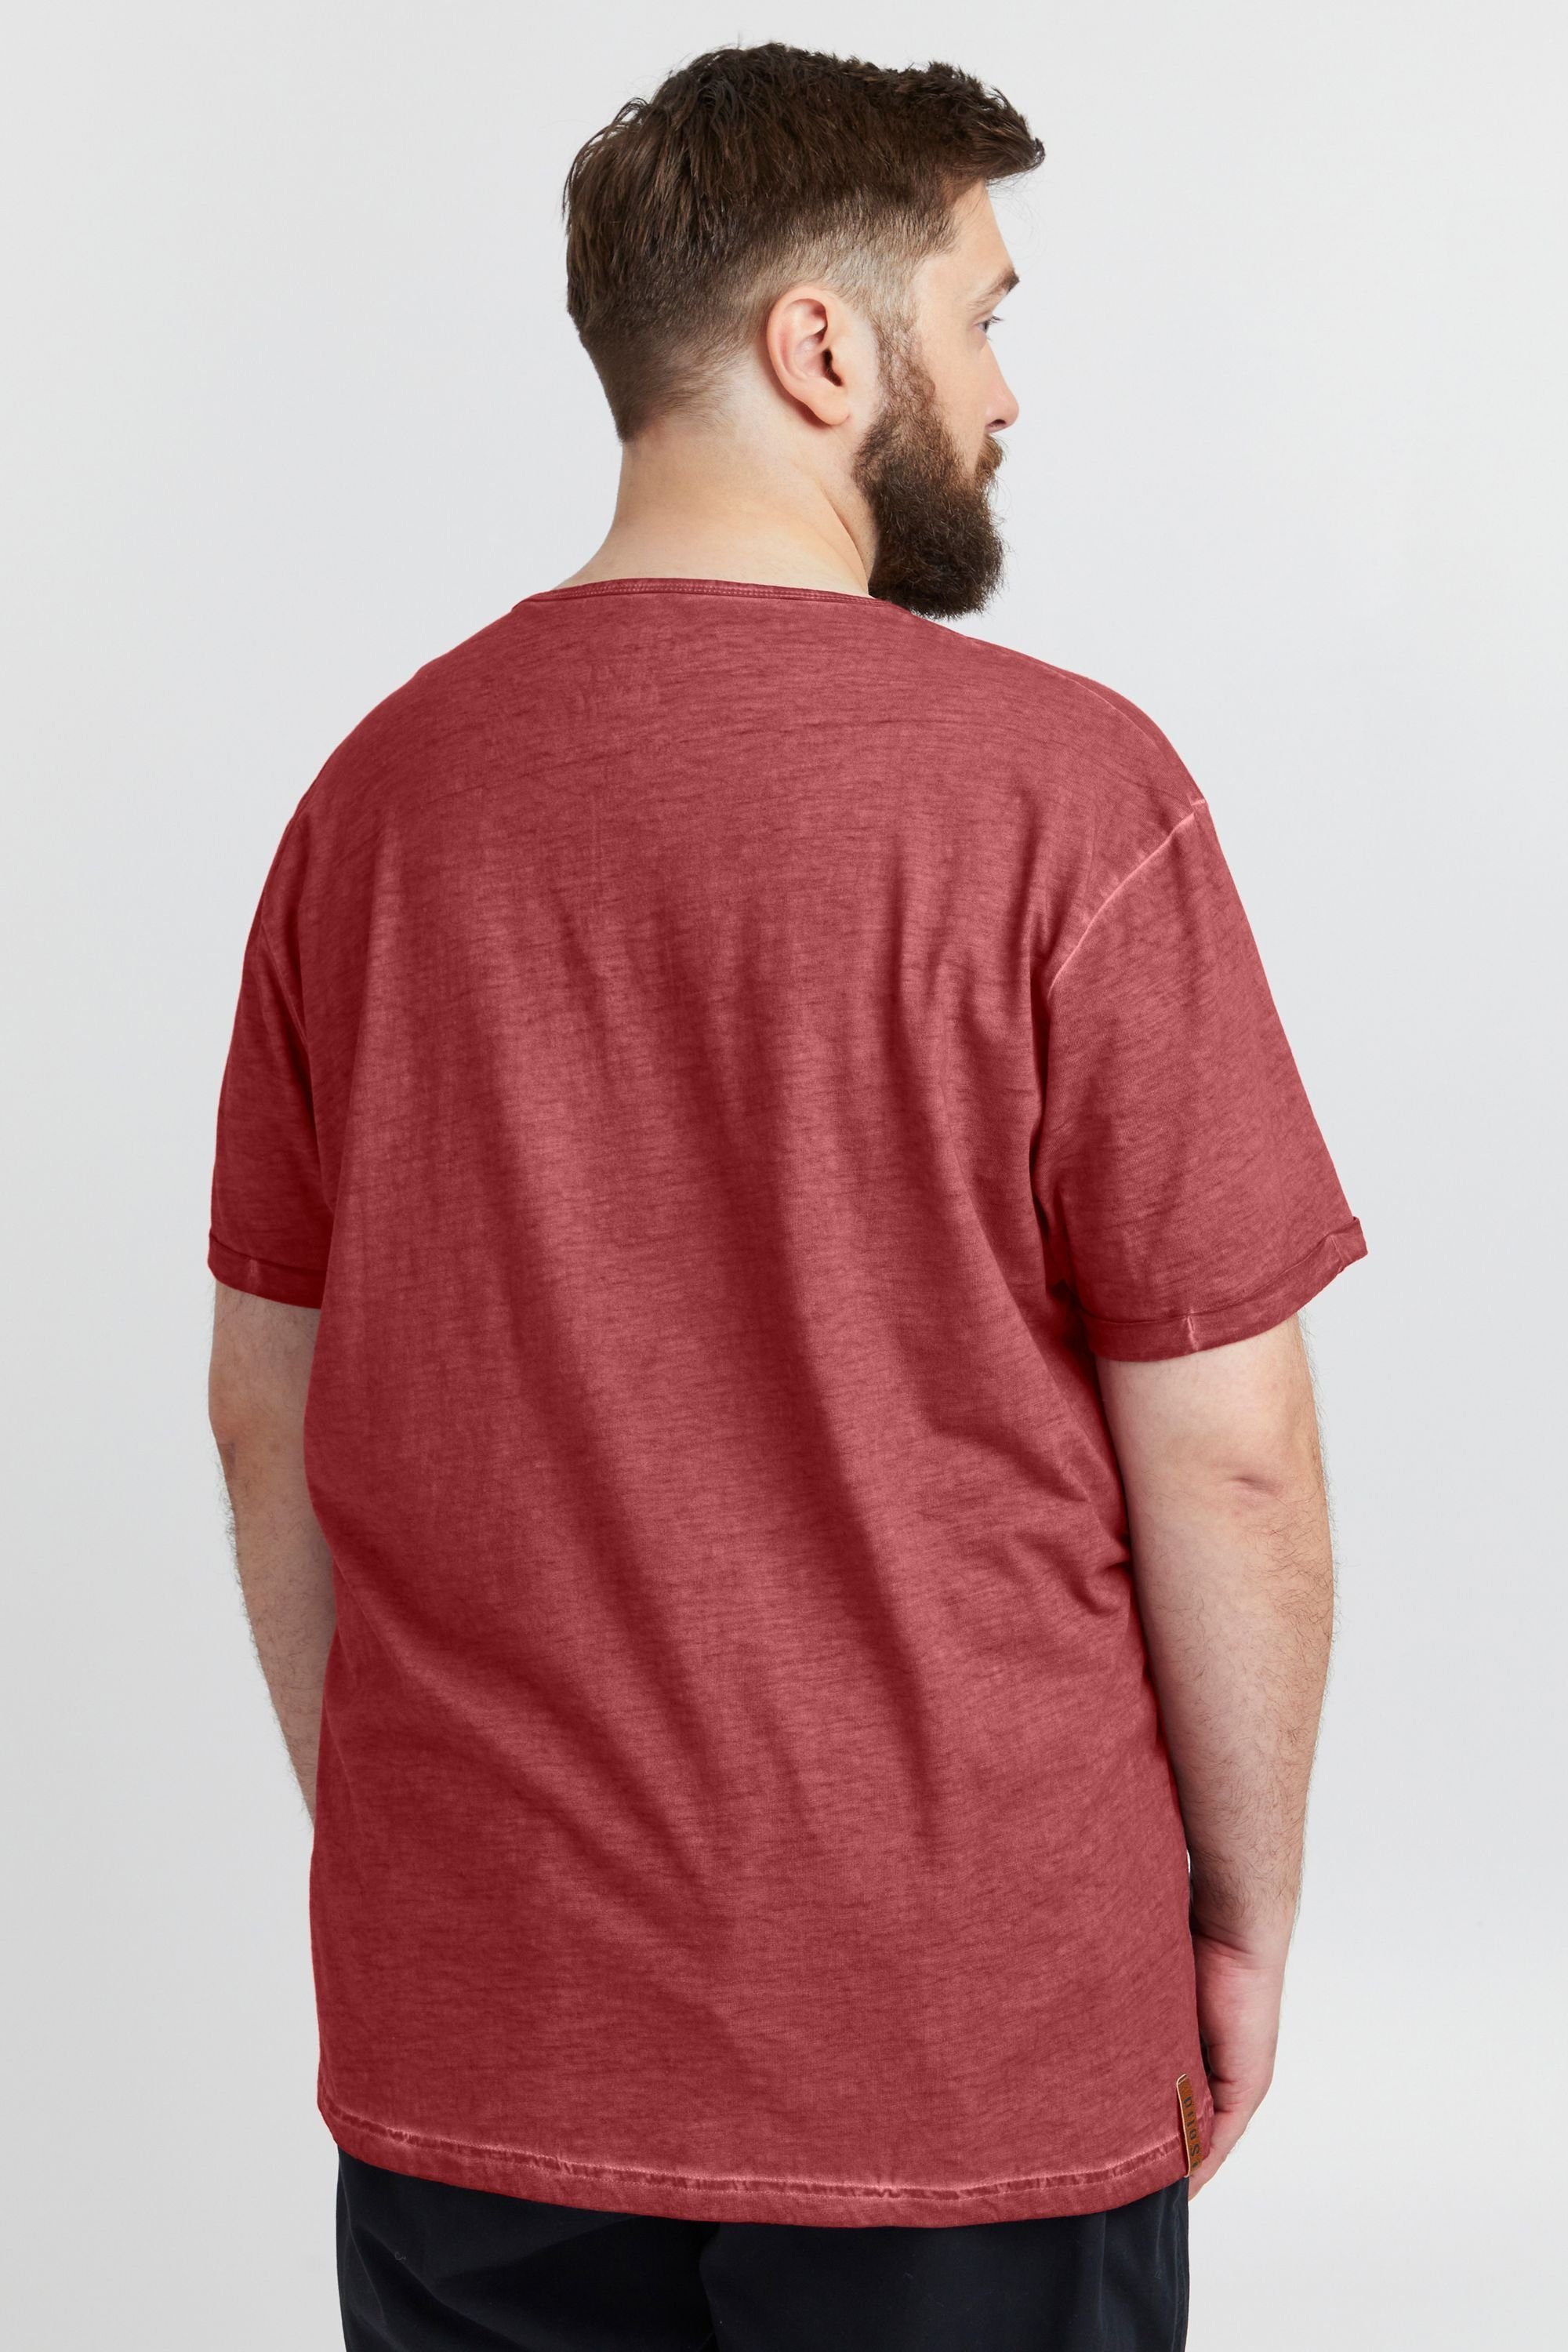 T-Shirt RED BT !Solid (790985) SDTihn WINE